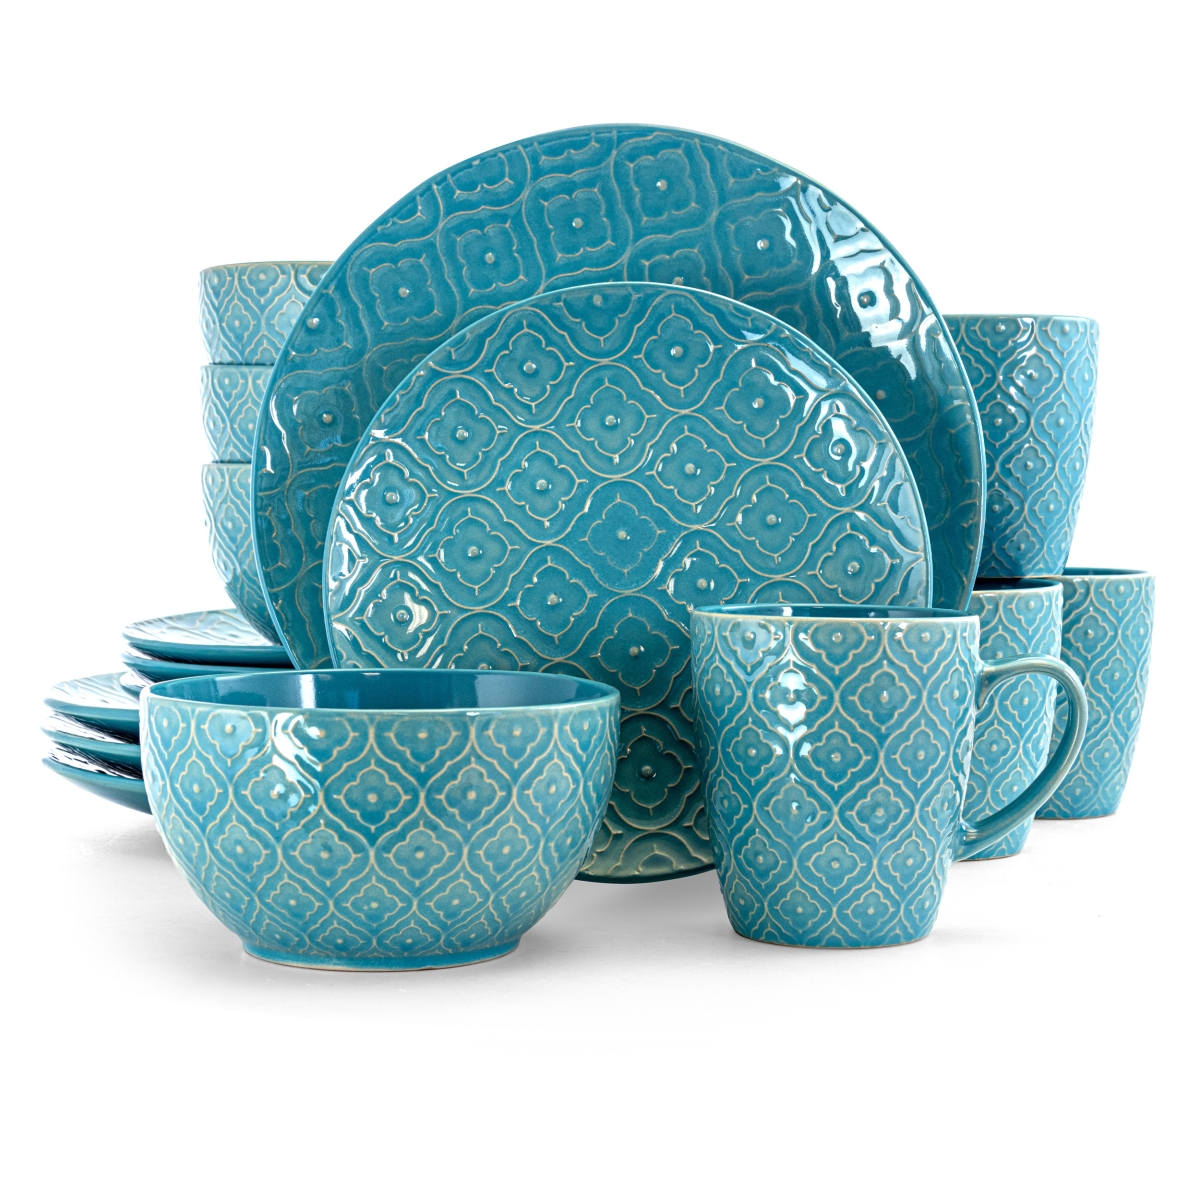 El-aqualily Lily Luxurious Stoneware Dinnerware With Complete Setting For 4, Aqua - 16 Piece